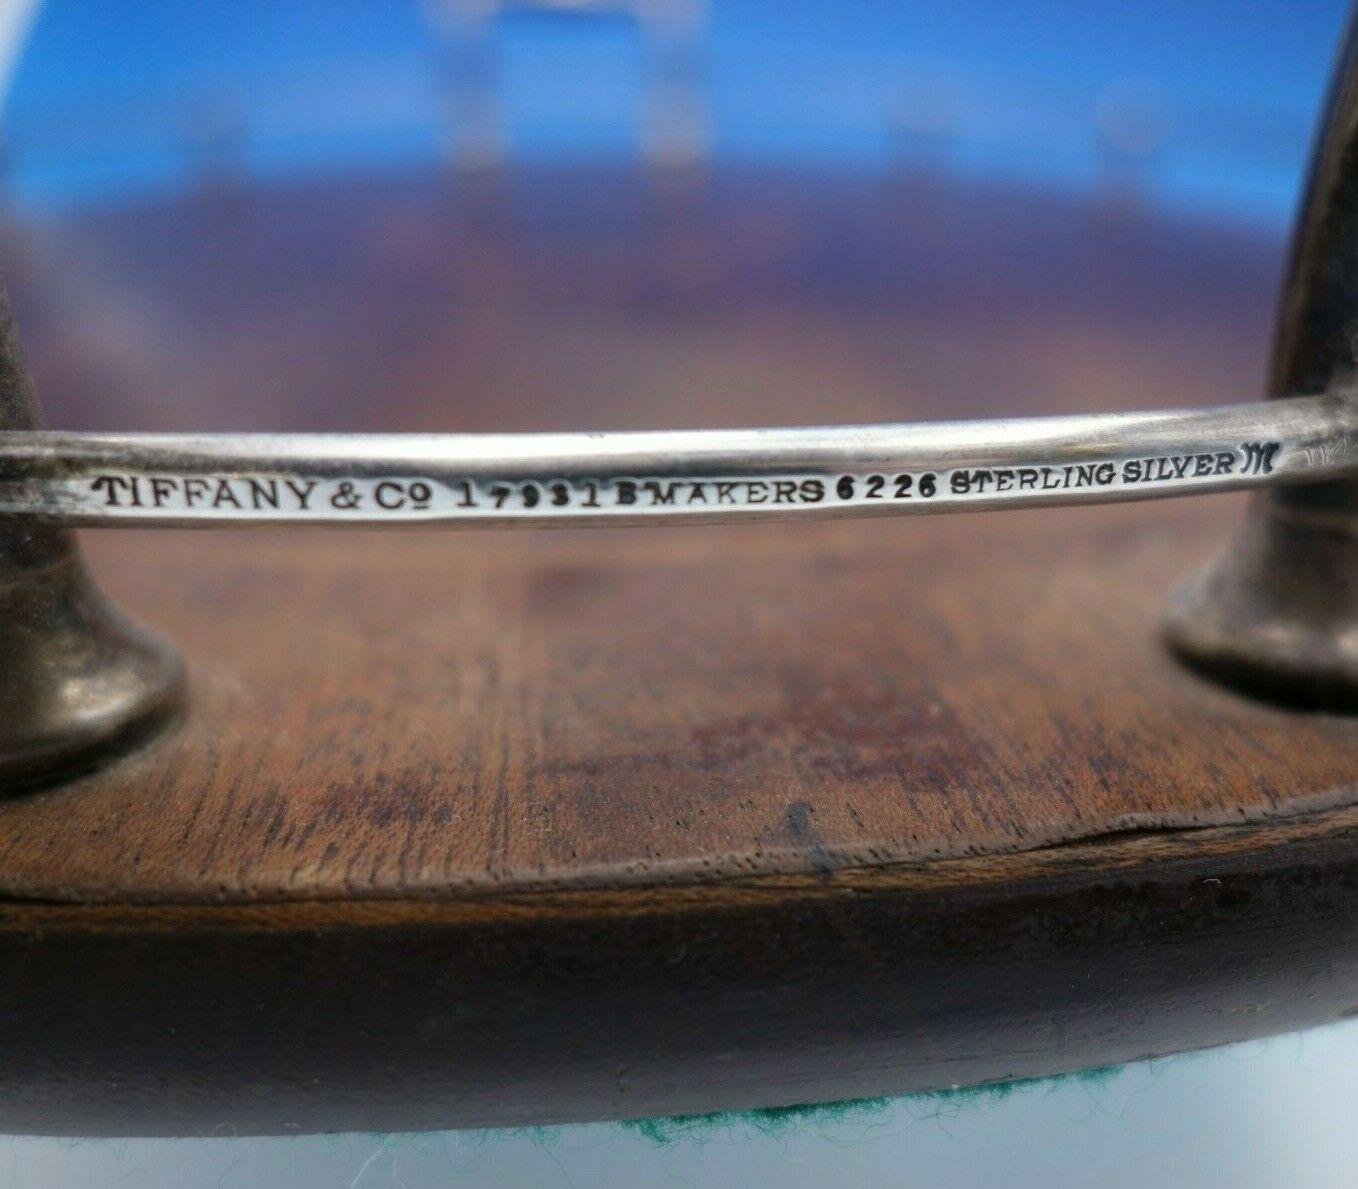 Faneuil by Tiffany & Co. Sterling Silver Wood Gallery Tray #17931-6226 1